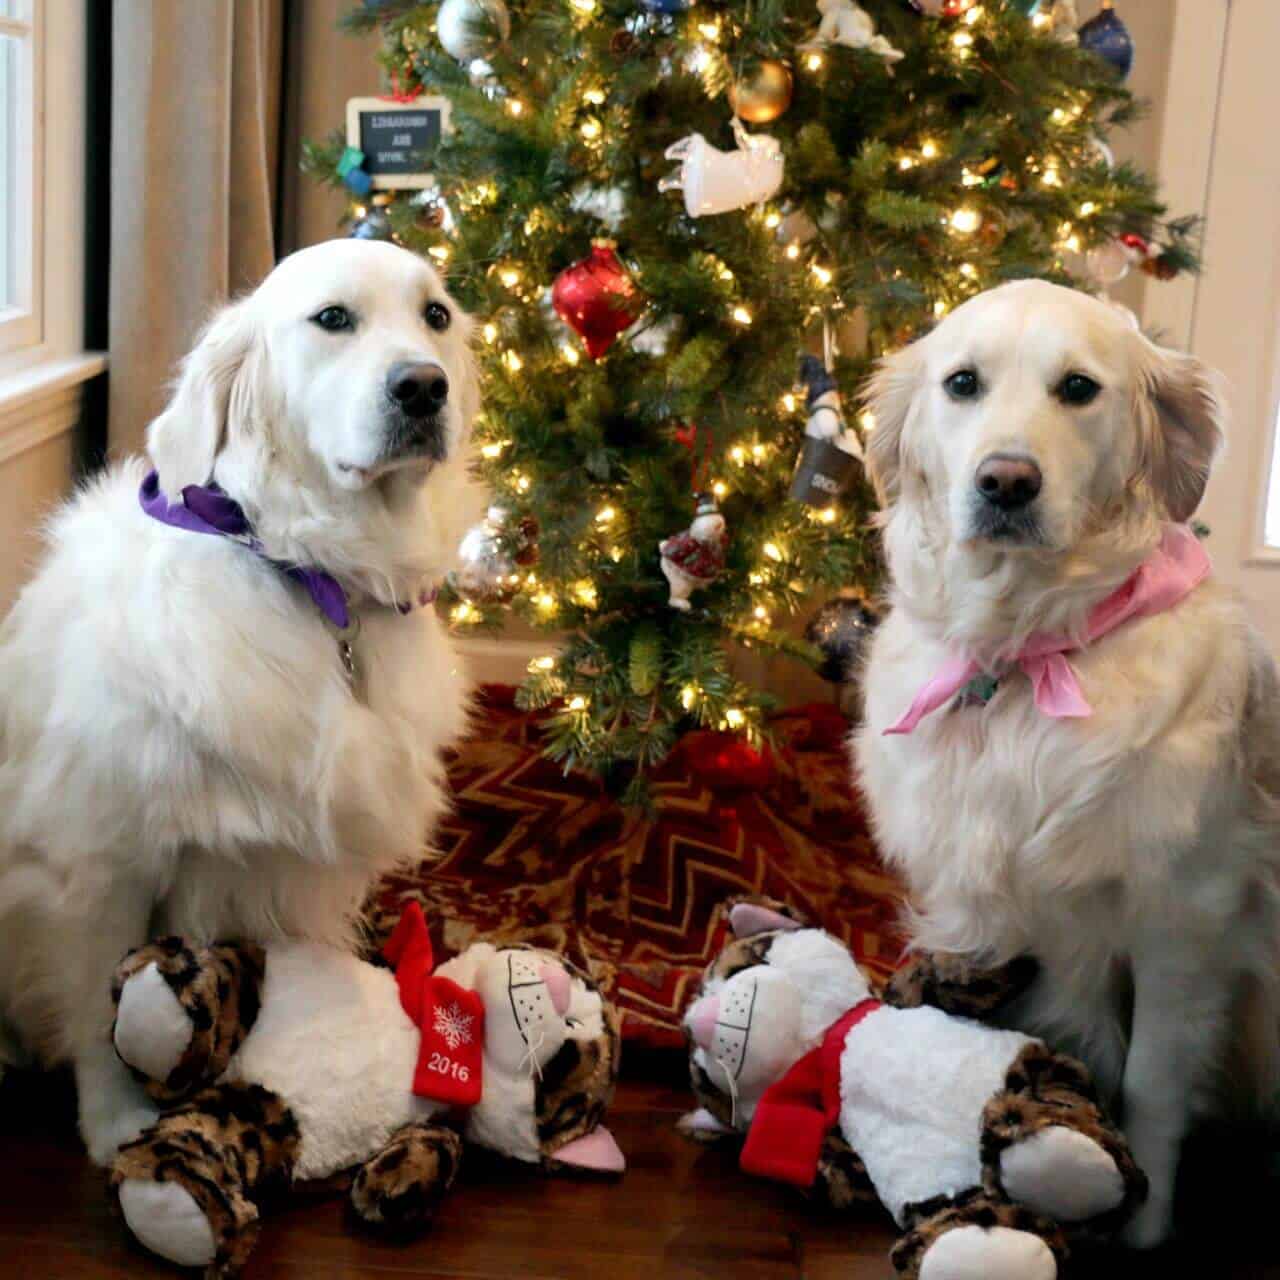 Molly and Lilly with stuffed cats and the Christmas tree